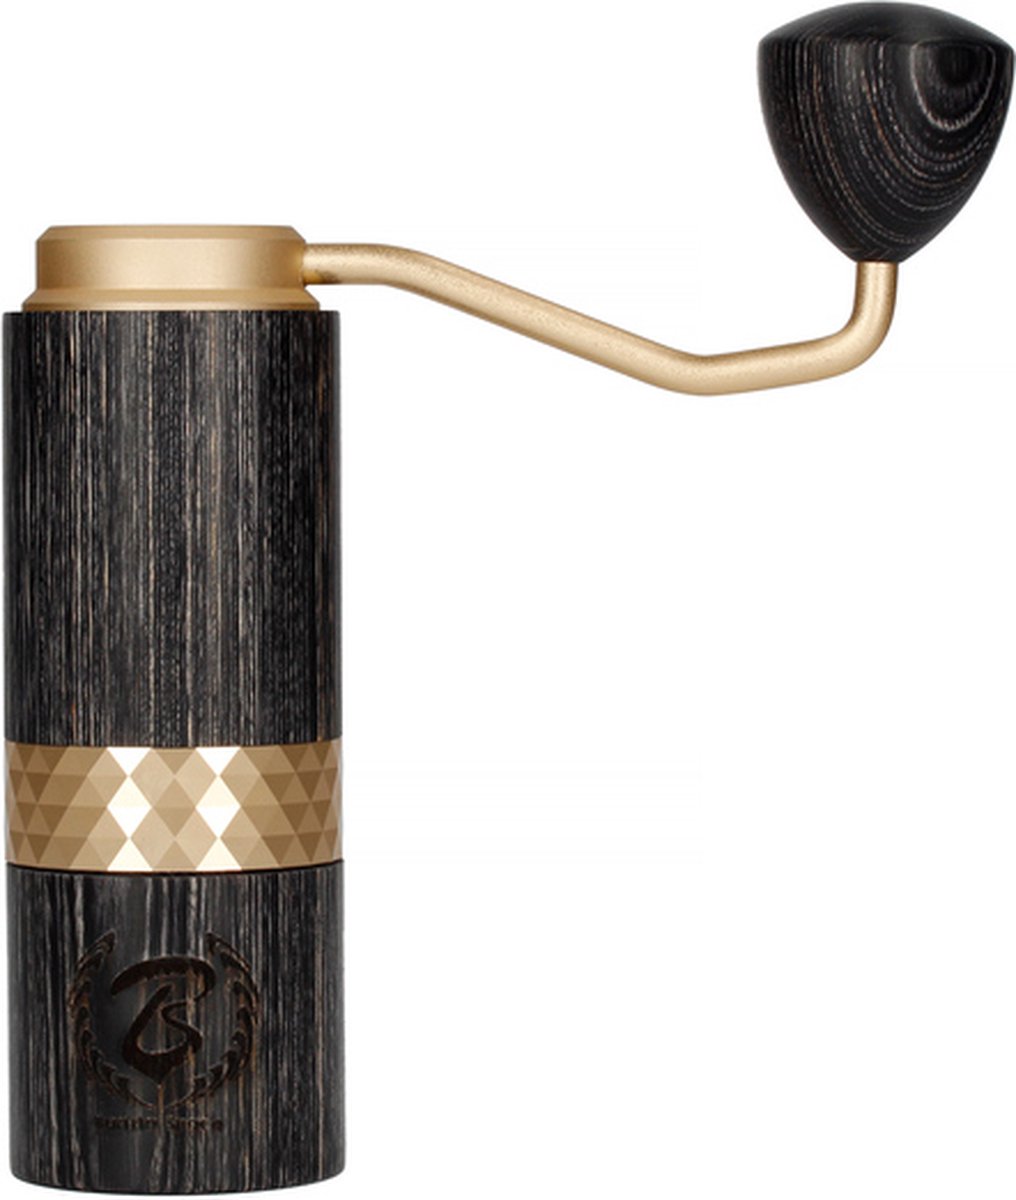 Barista Space - Hand Grinder Wood with gold